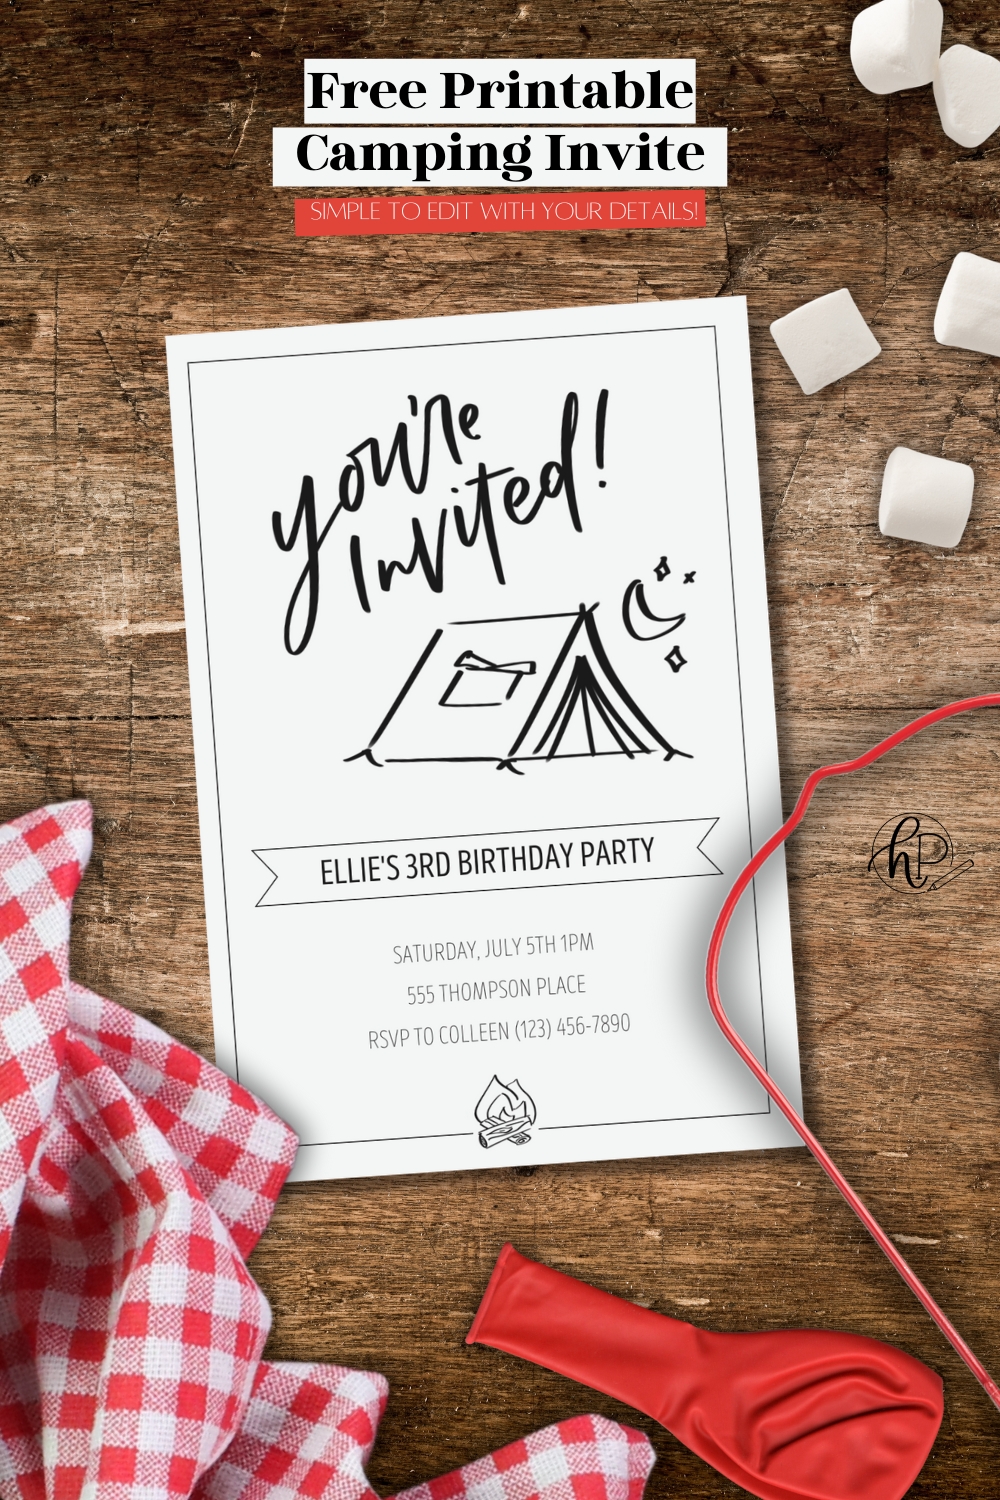 printed camping party invitations that include a hand lettered title 